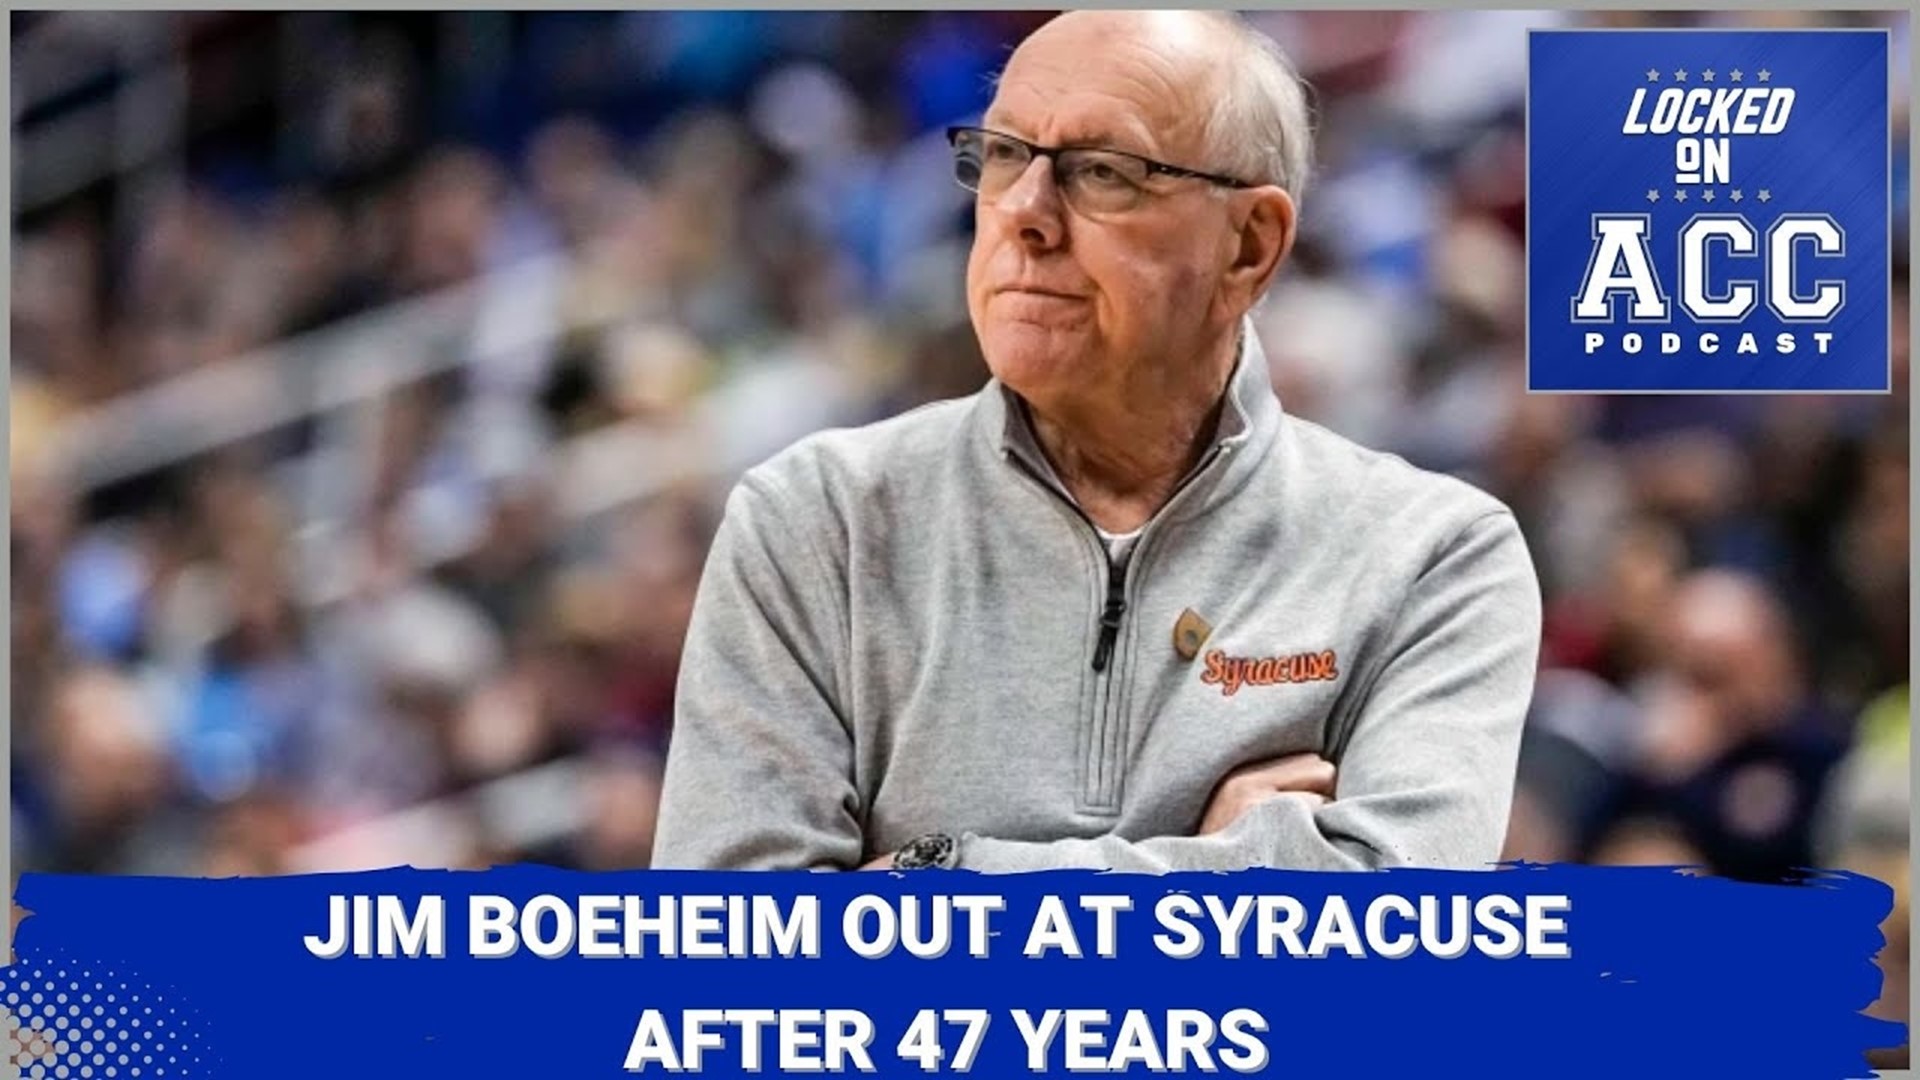 Jim Boeheim's departure from Syracuse comes at the heels of Wake Forest's Damien Williamson last second 3 that send the Demon Deacons to the Quarterfinals.